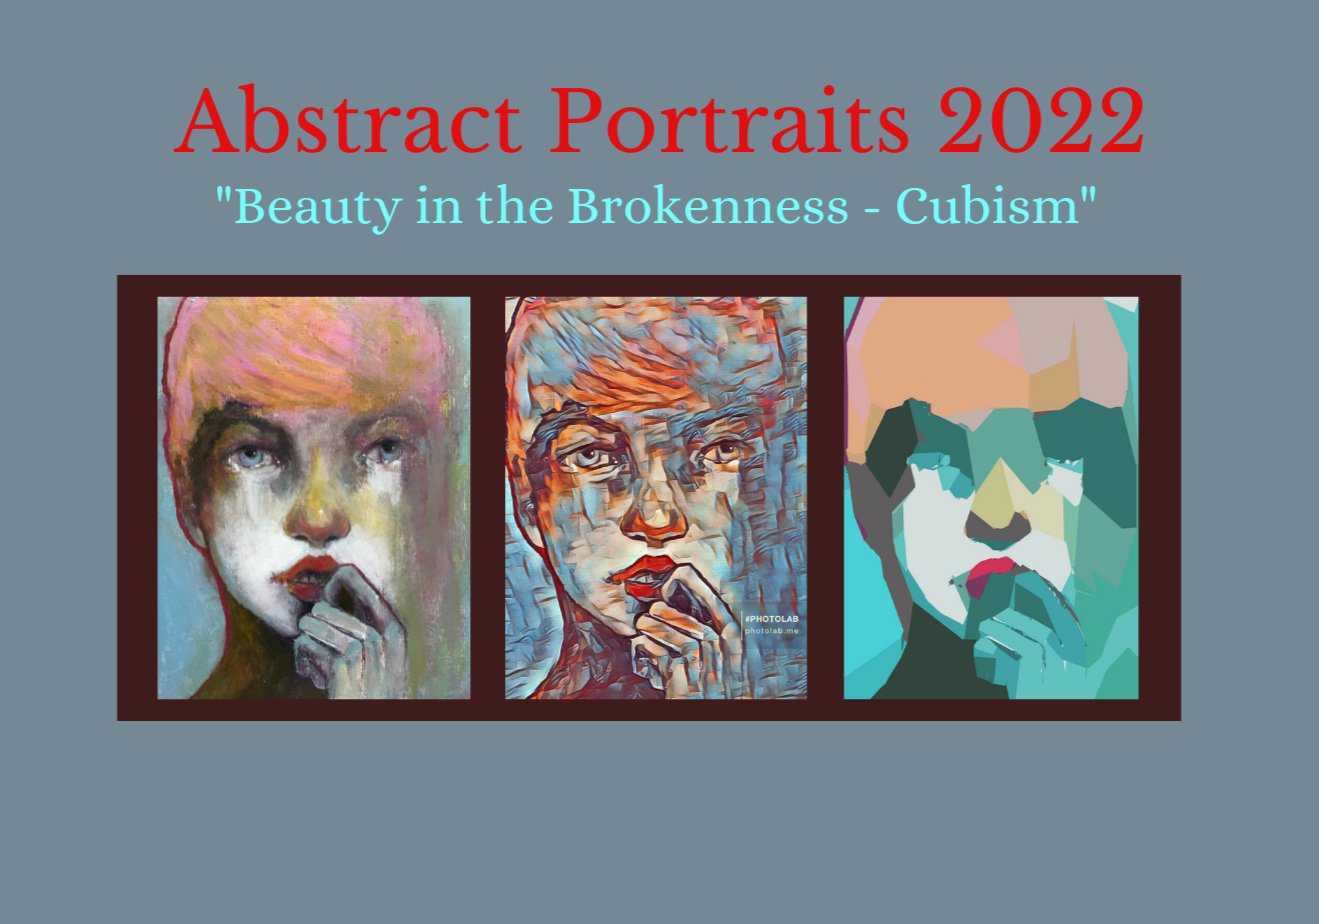 Abstract Portraits 2022